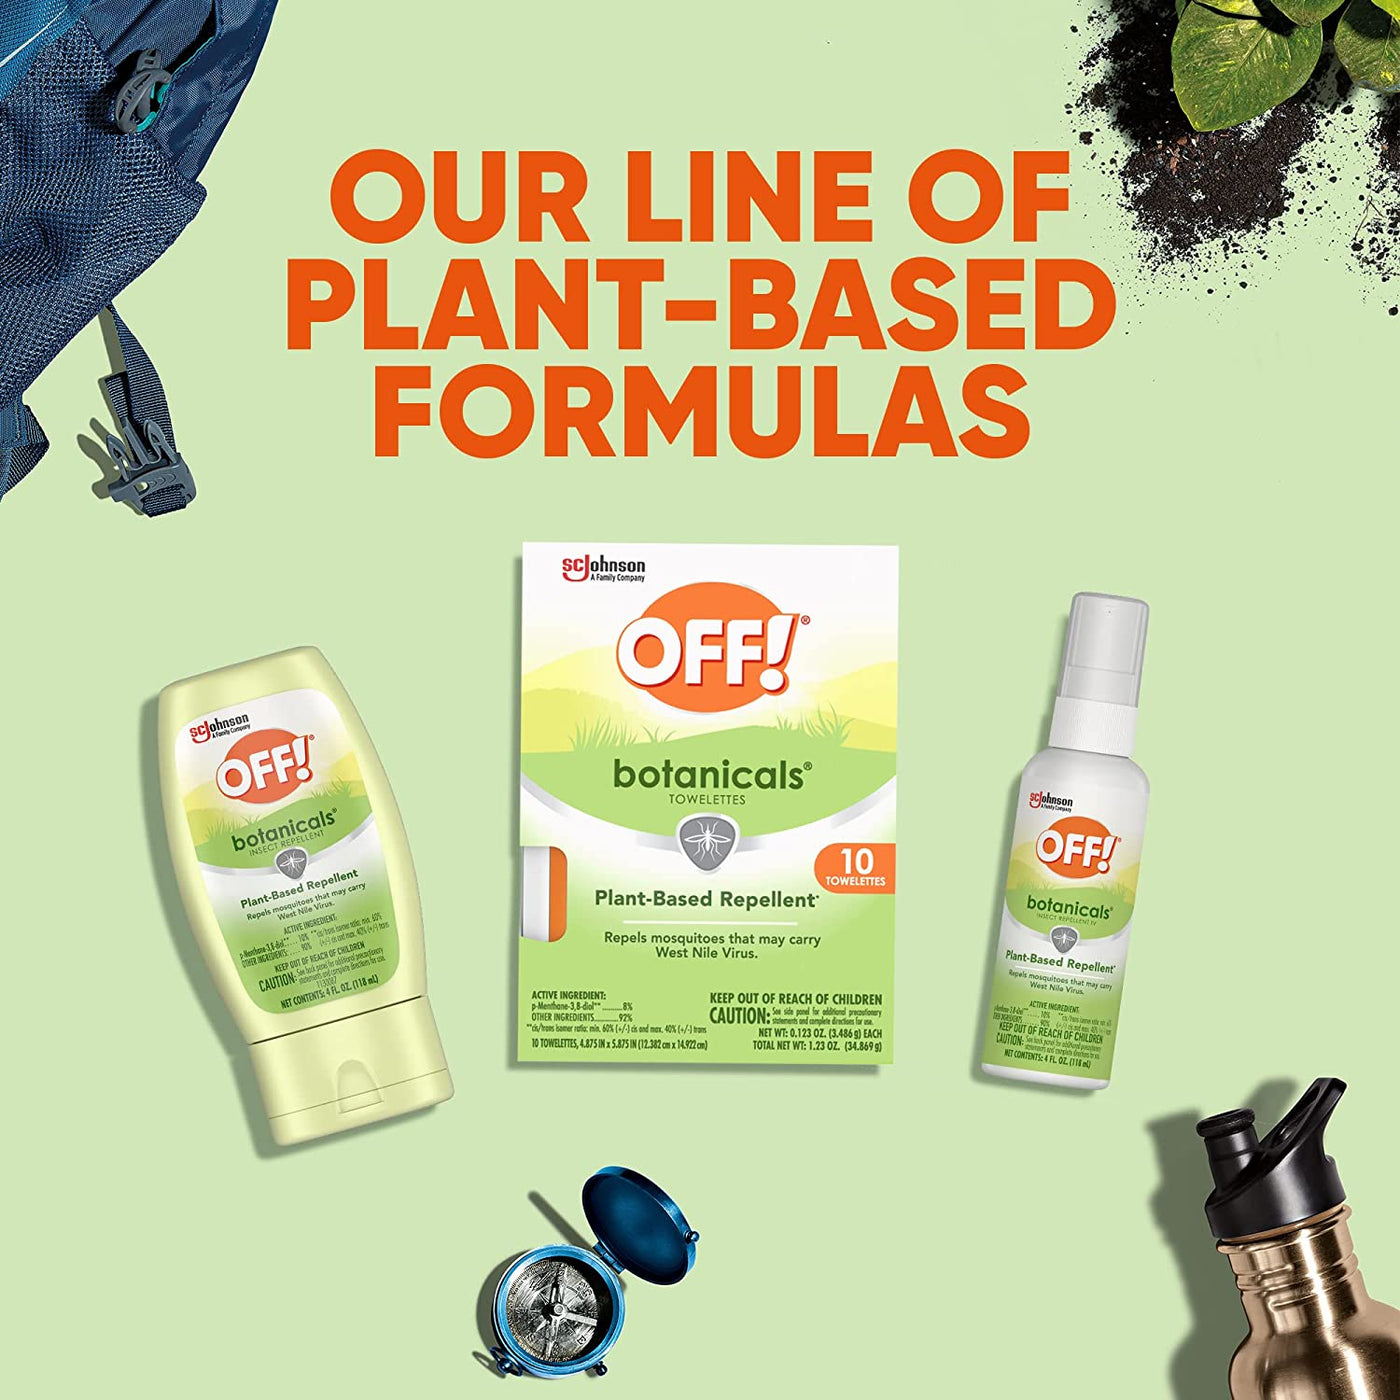 OFF! Botanicals Insect Repellent, Plant-Based Bug Spray & Mosquito Repellent, 4 oz